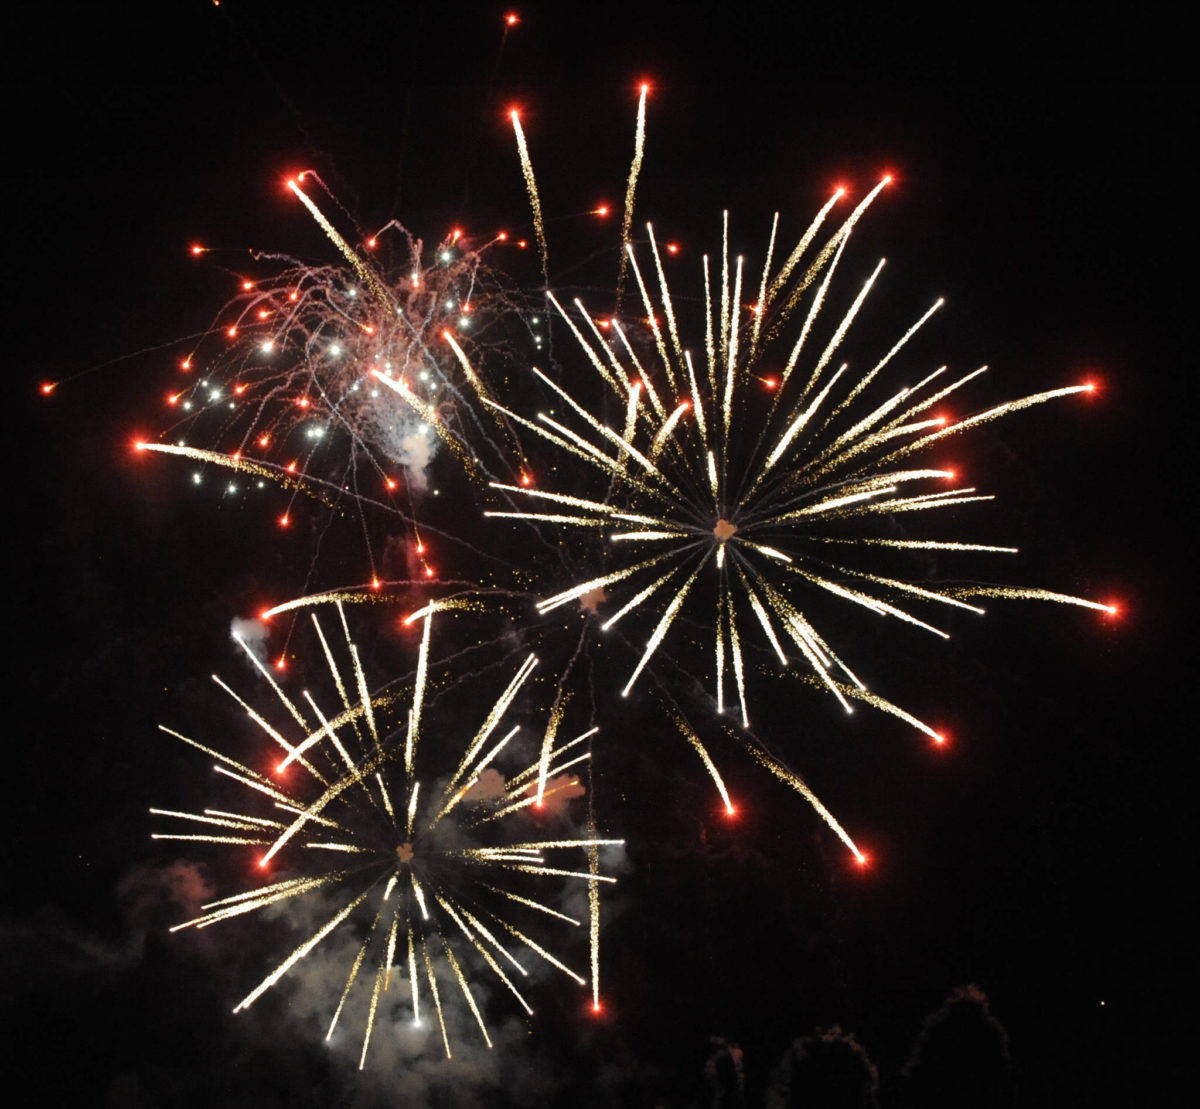 City of Sequim staff will begin negotiations to bring a fireworks show to Carrie Blake Community Park on Independence Day. In non-pandemic years, Sequim hosts fireworks each May for the Sequim Irrigation Festival Logging Show, as seen here in 2018. Sequim Gazette file photo by Michael Dashiell